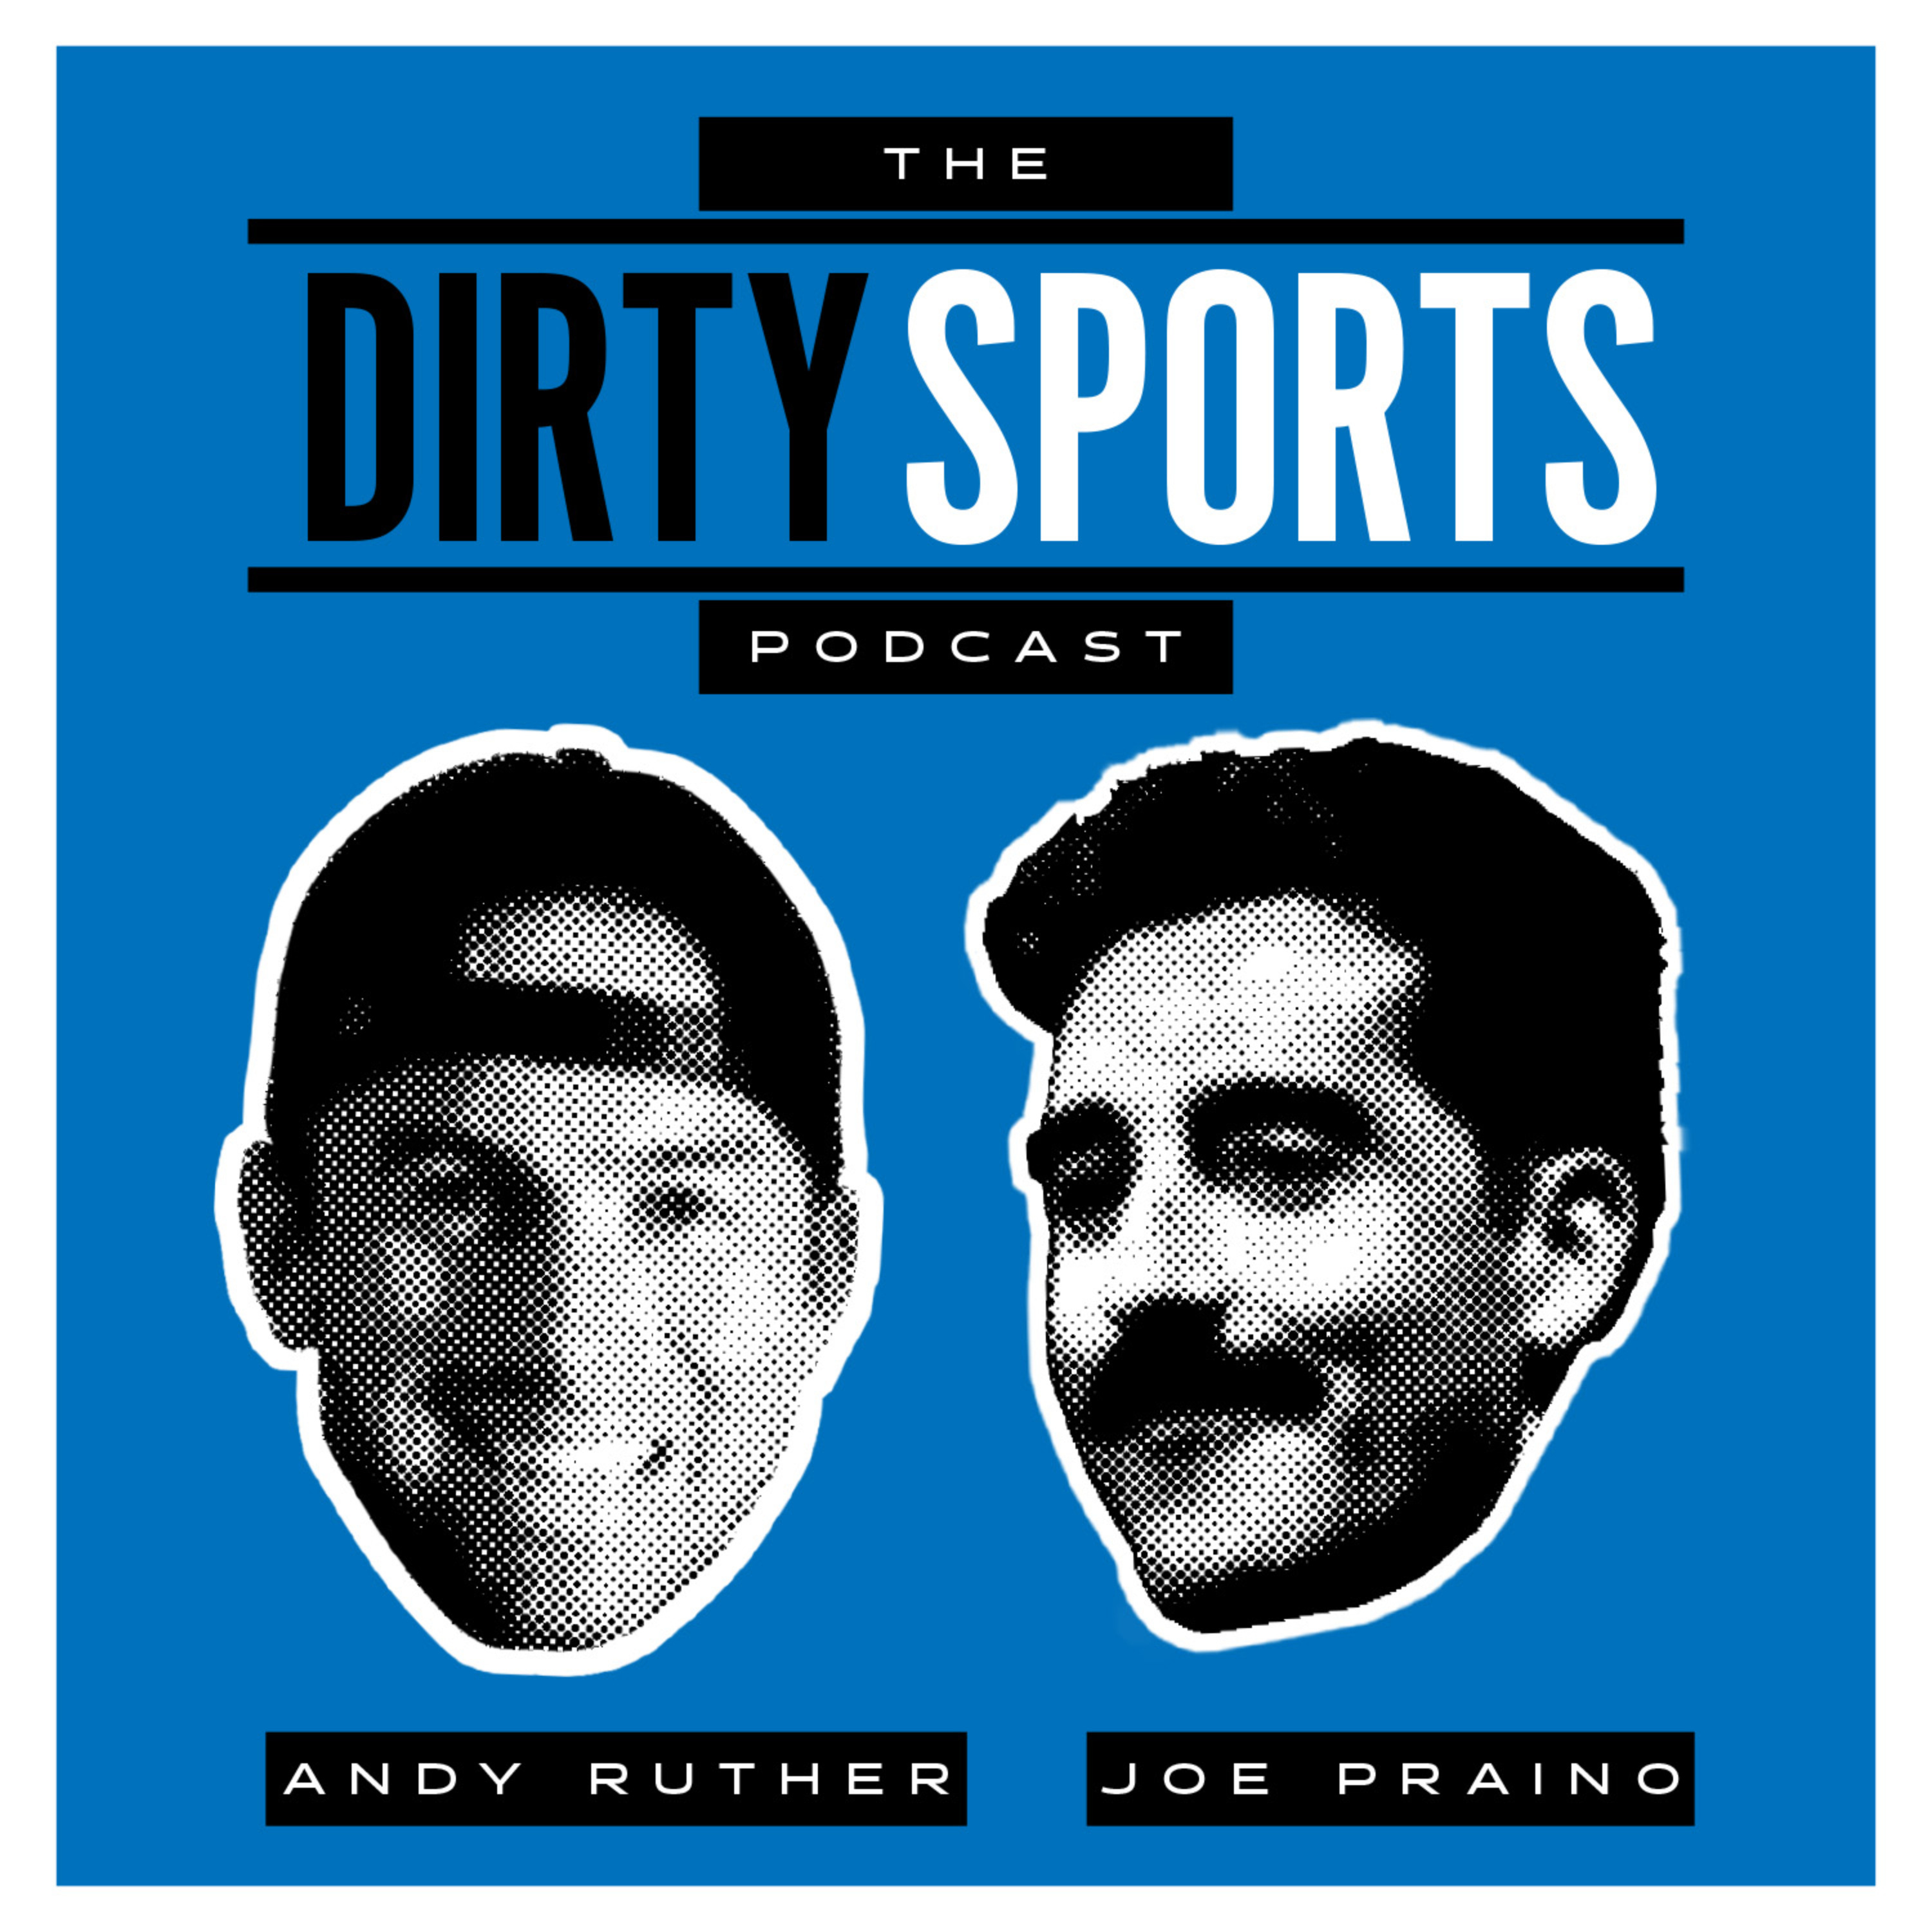 EPISODE 952: Dirty Sports is Headed to New Orleans